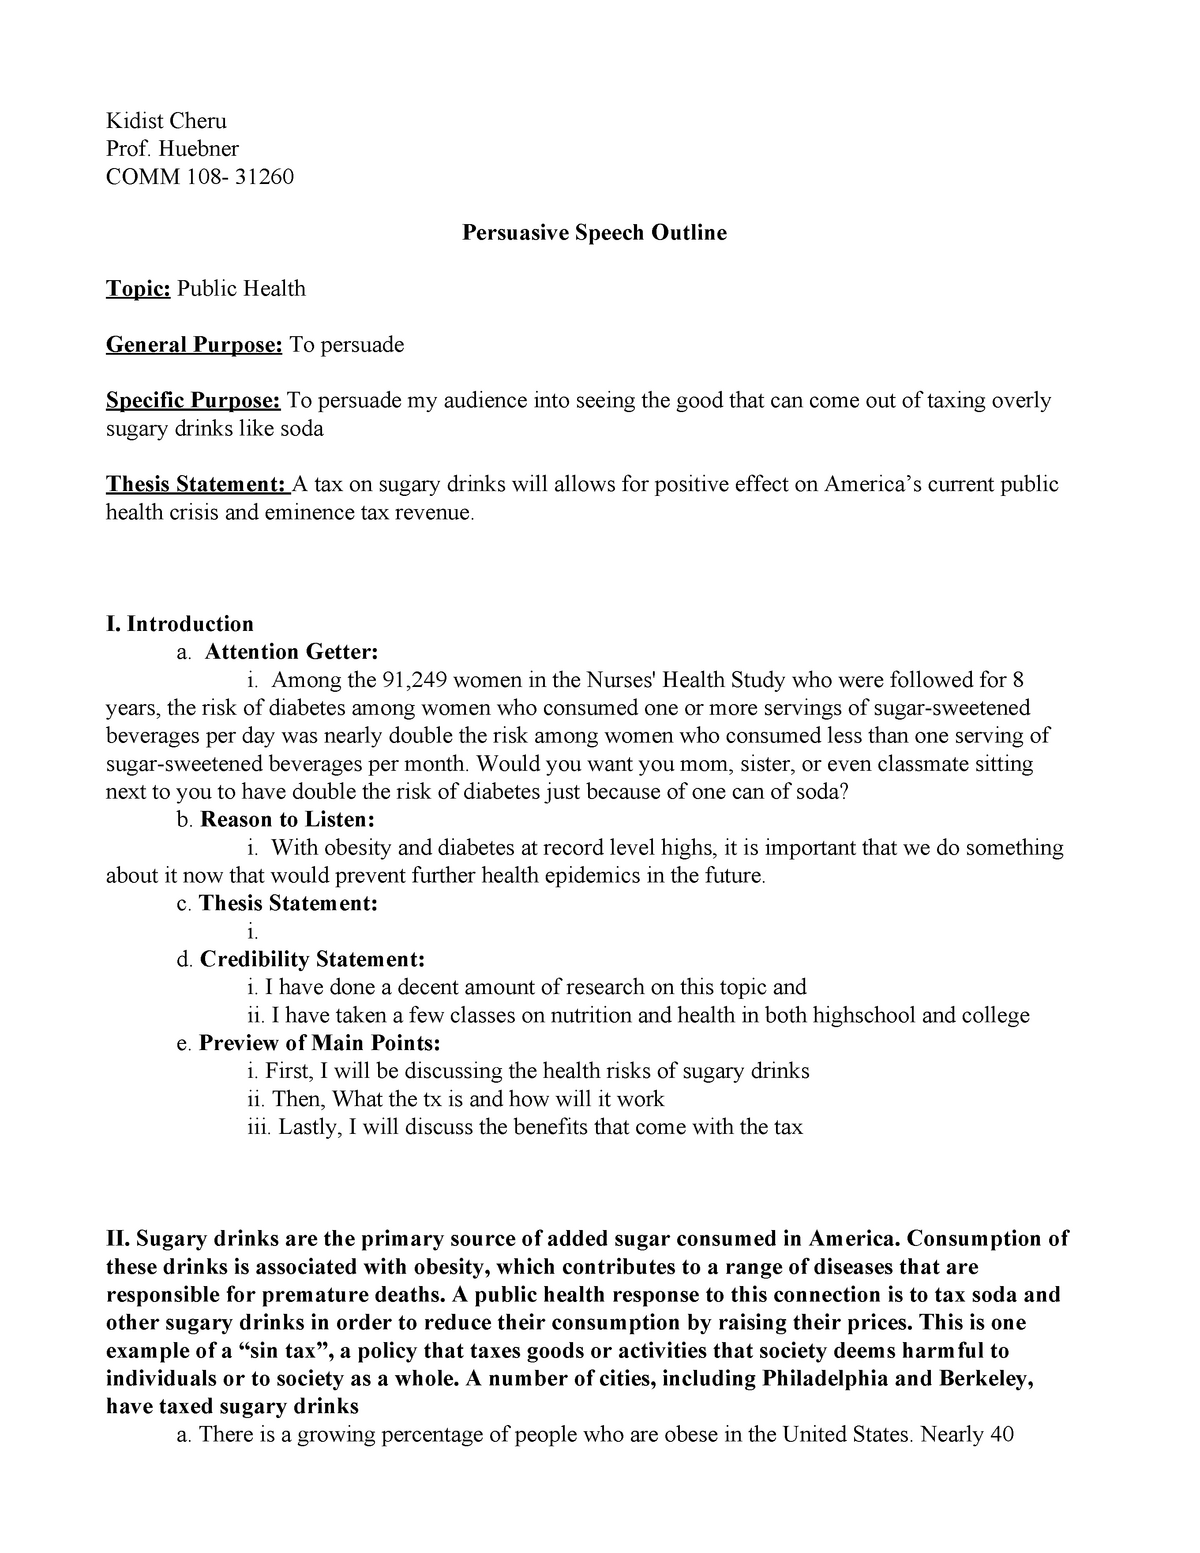 Persuasive Speech Outline Template - 15+ Examples, Samples & Formats